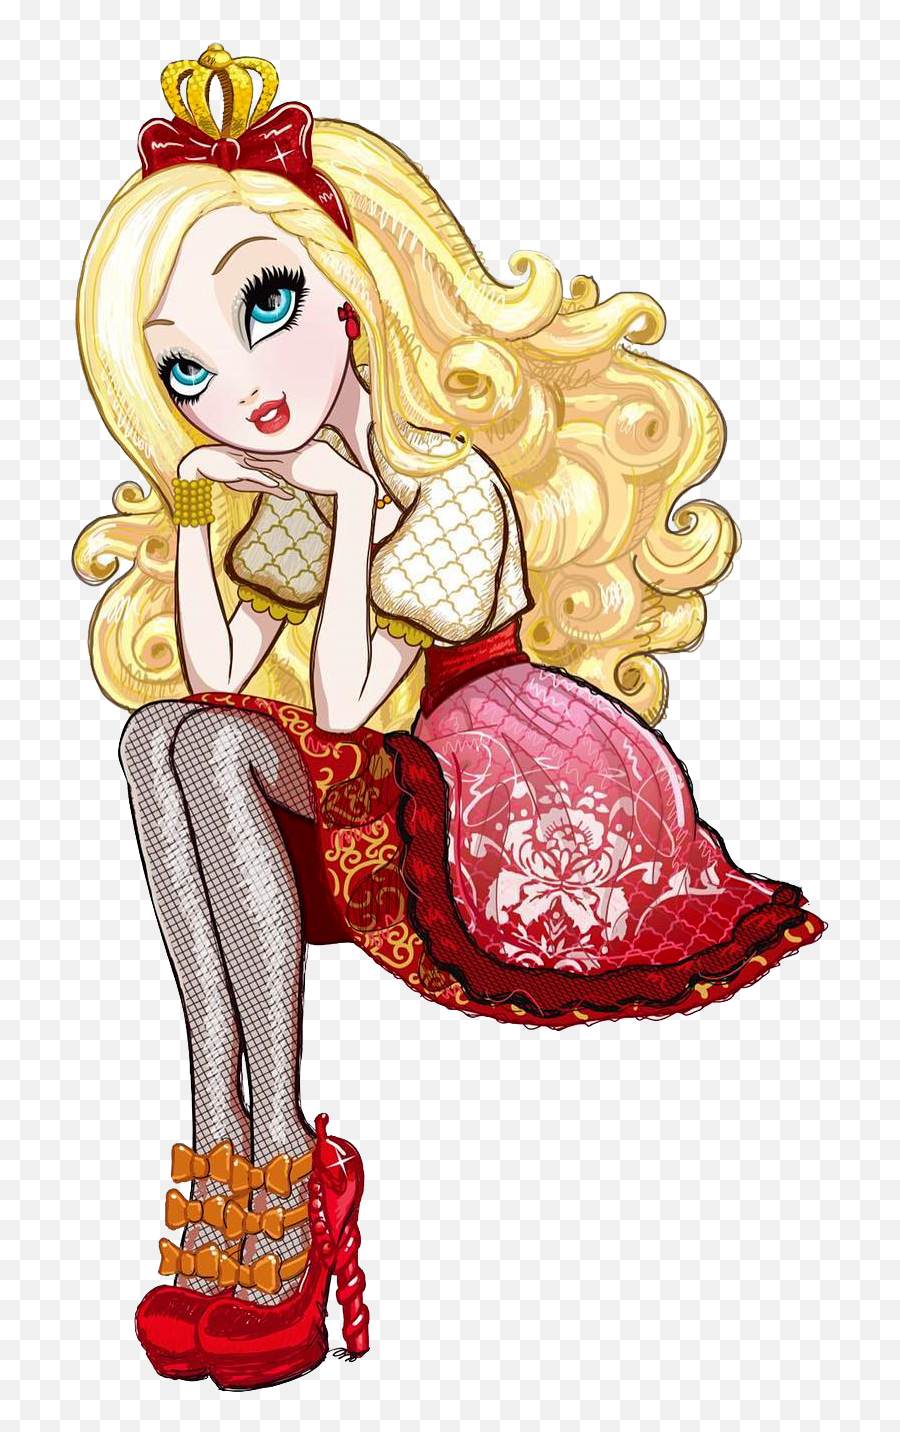 Applewhite Apple Blancanieves Sticker By Darling - Apple White Ever After High Characters Emoji,Royals Emoji